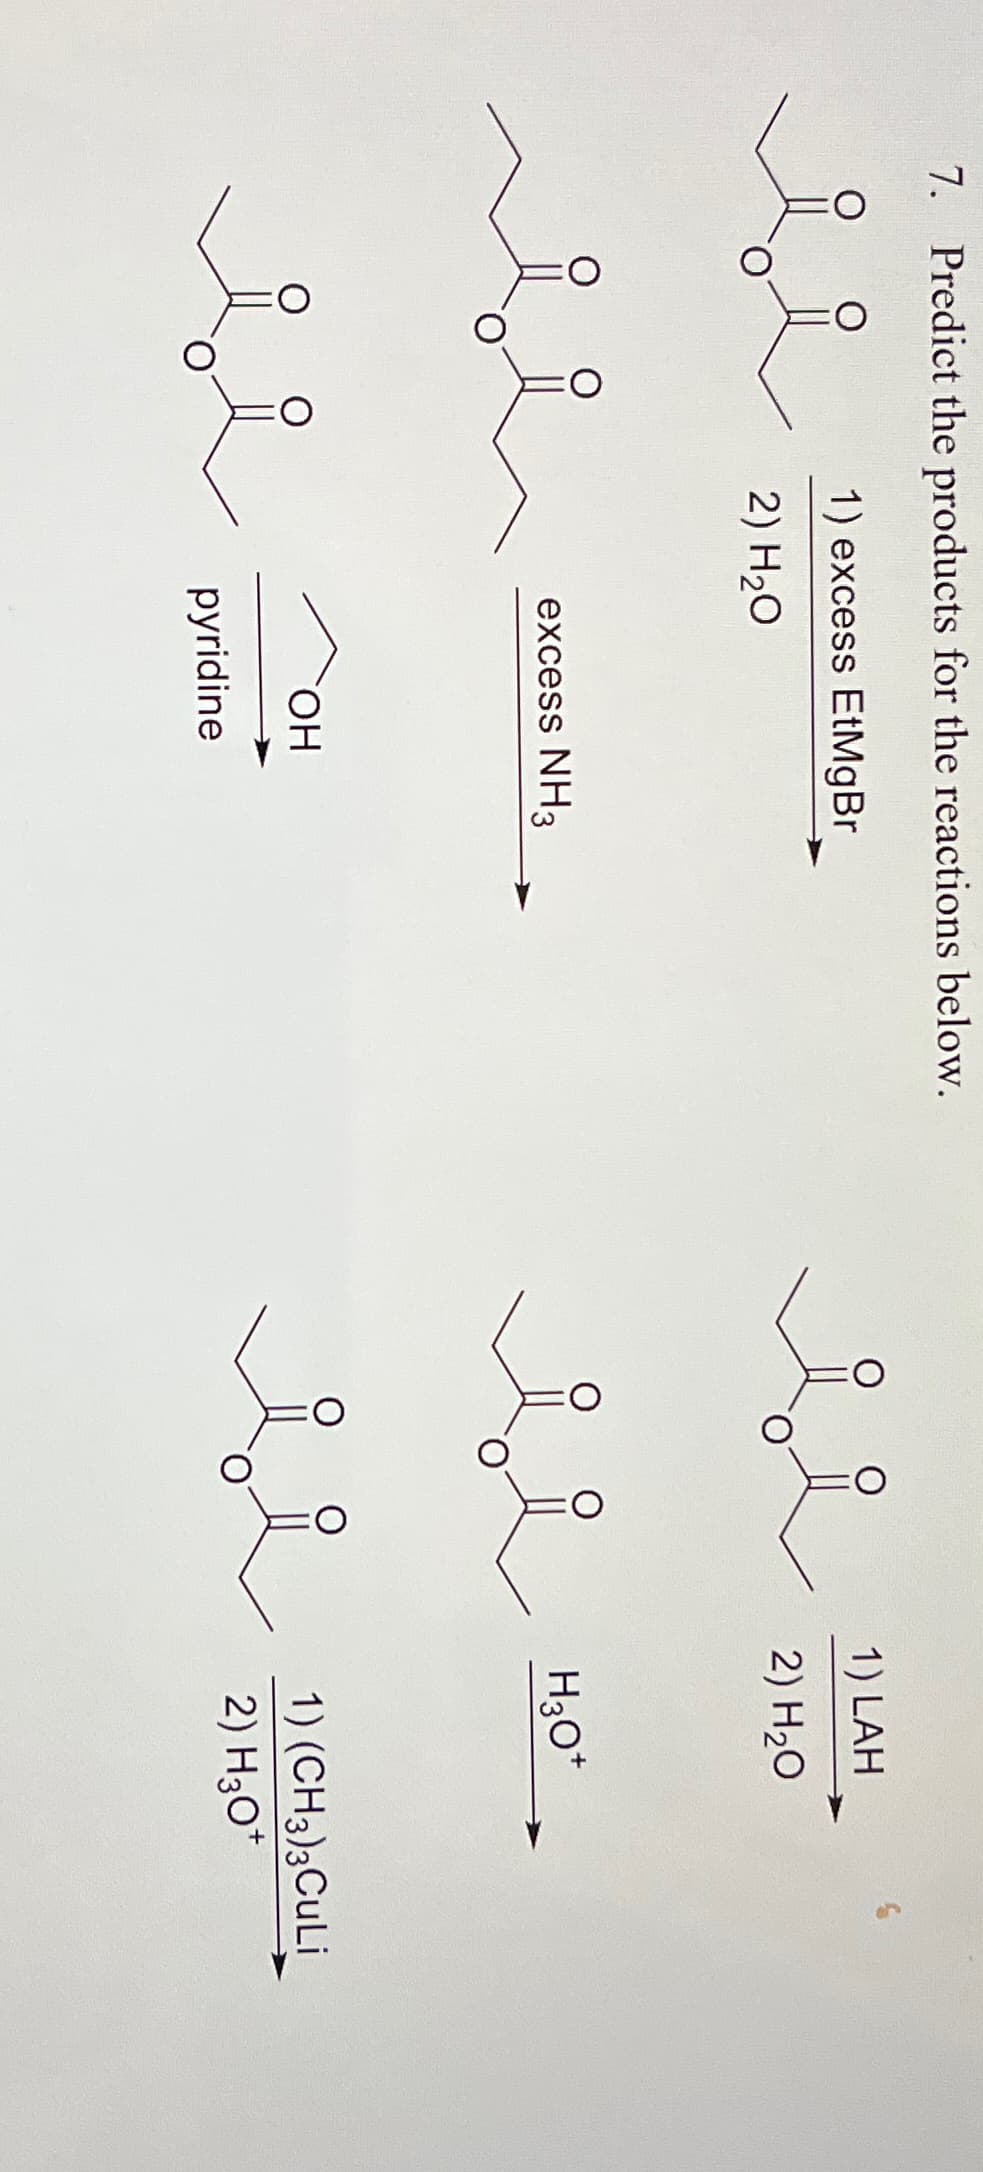 7. Predict the products for the reactions below.
1) excess EtMgBr
2) H20
excess NH3
ОН
pyridine
1) LAH
2) H20
H3O+
1) (CH3)3CuLi
2) H3O+